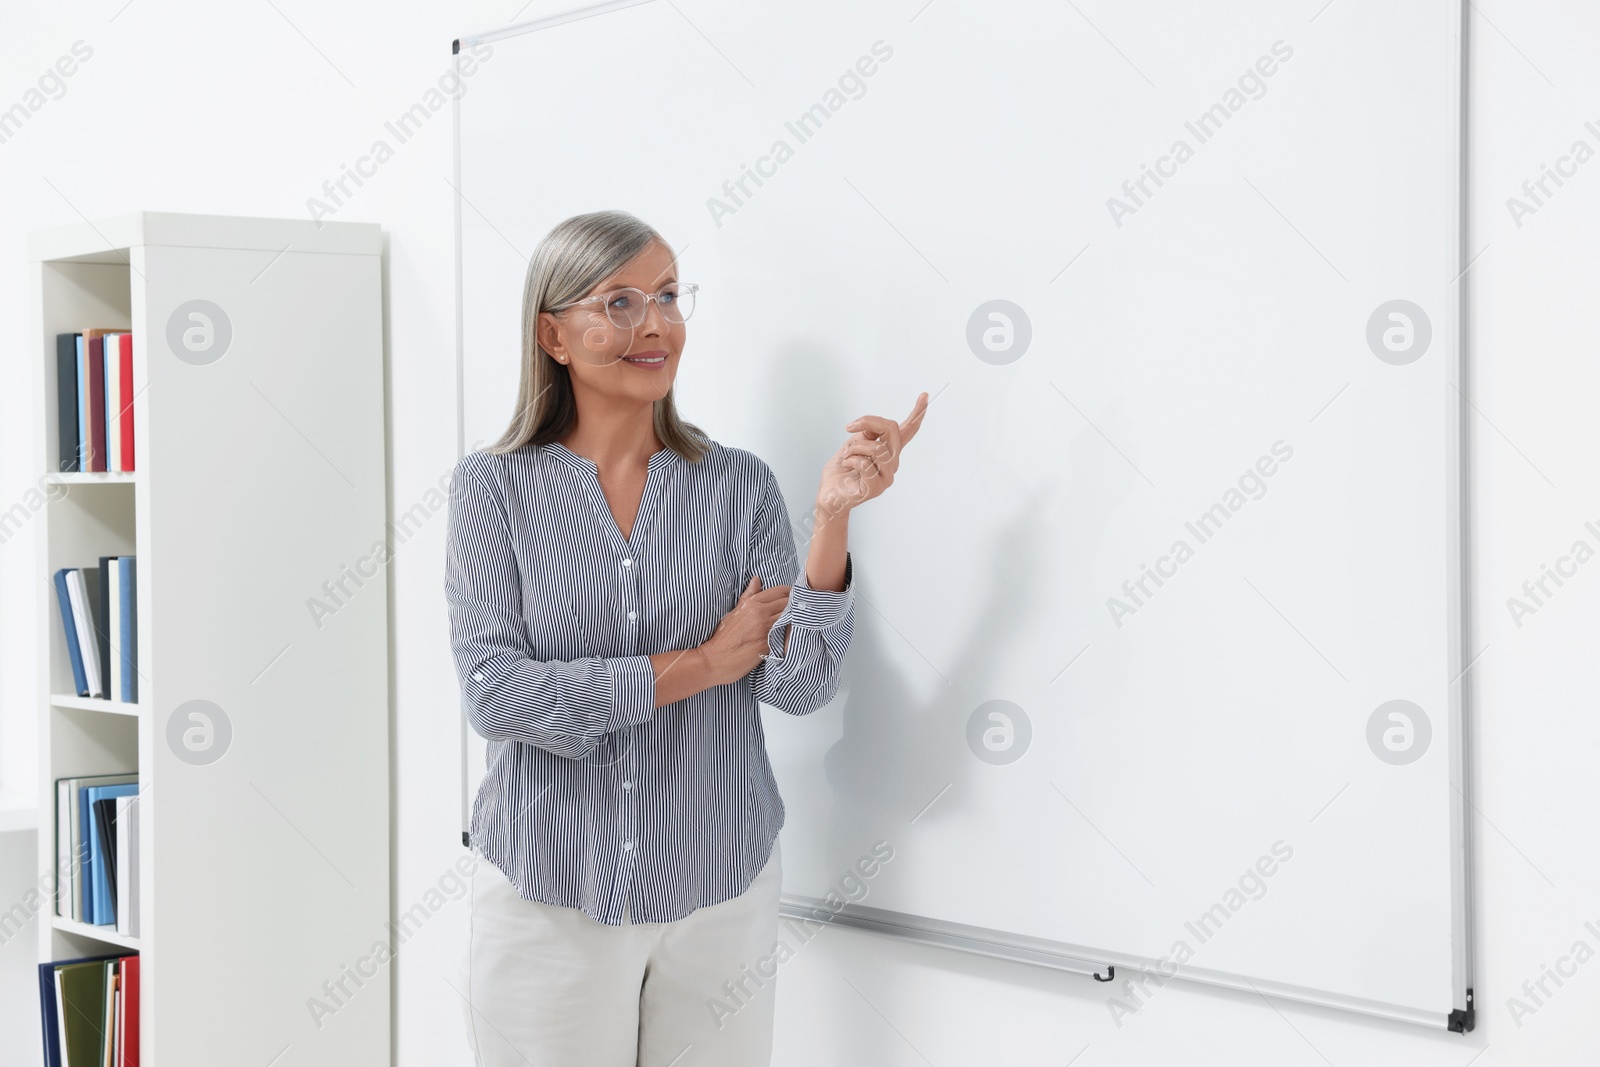 Photo of Professor giving lecture near whiteboard in classroom, space for text